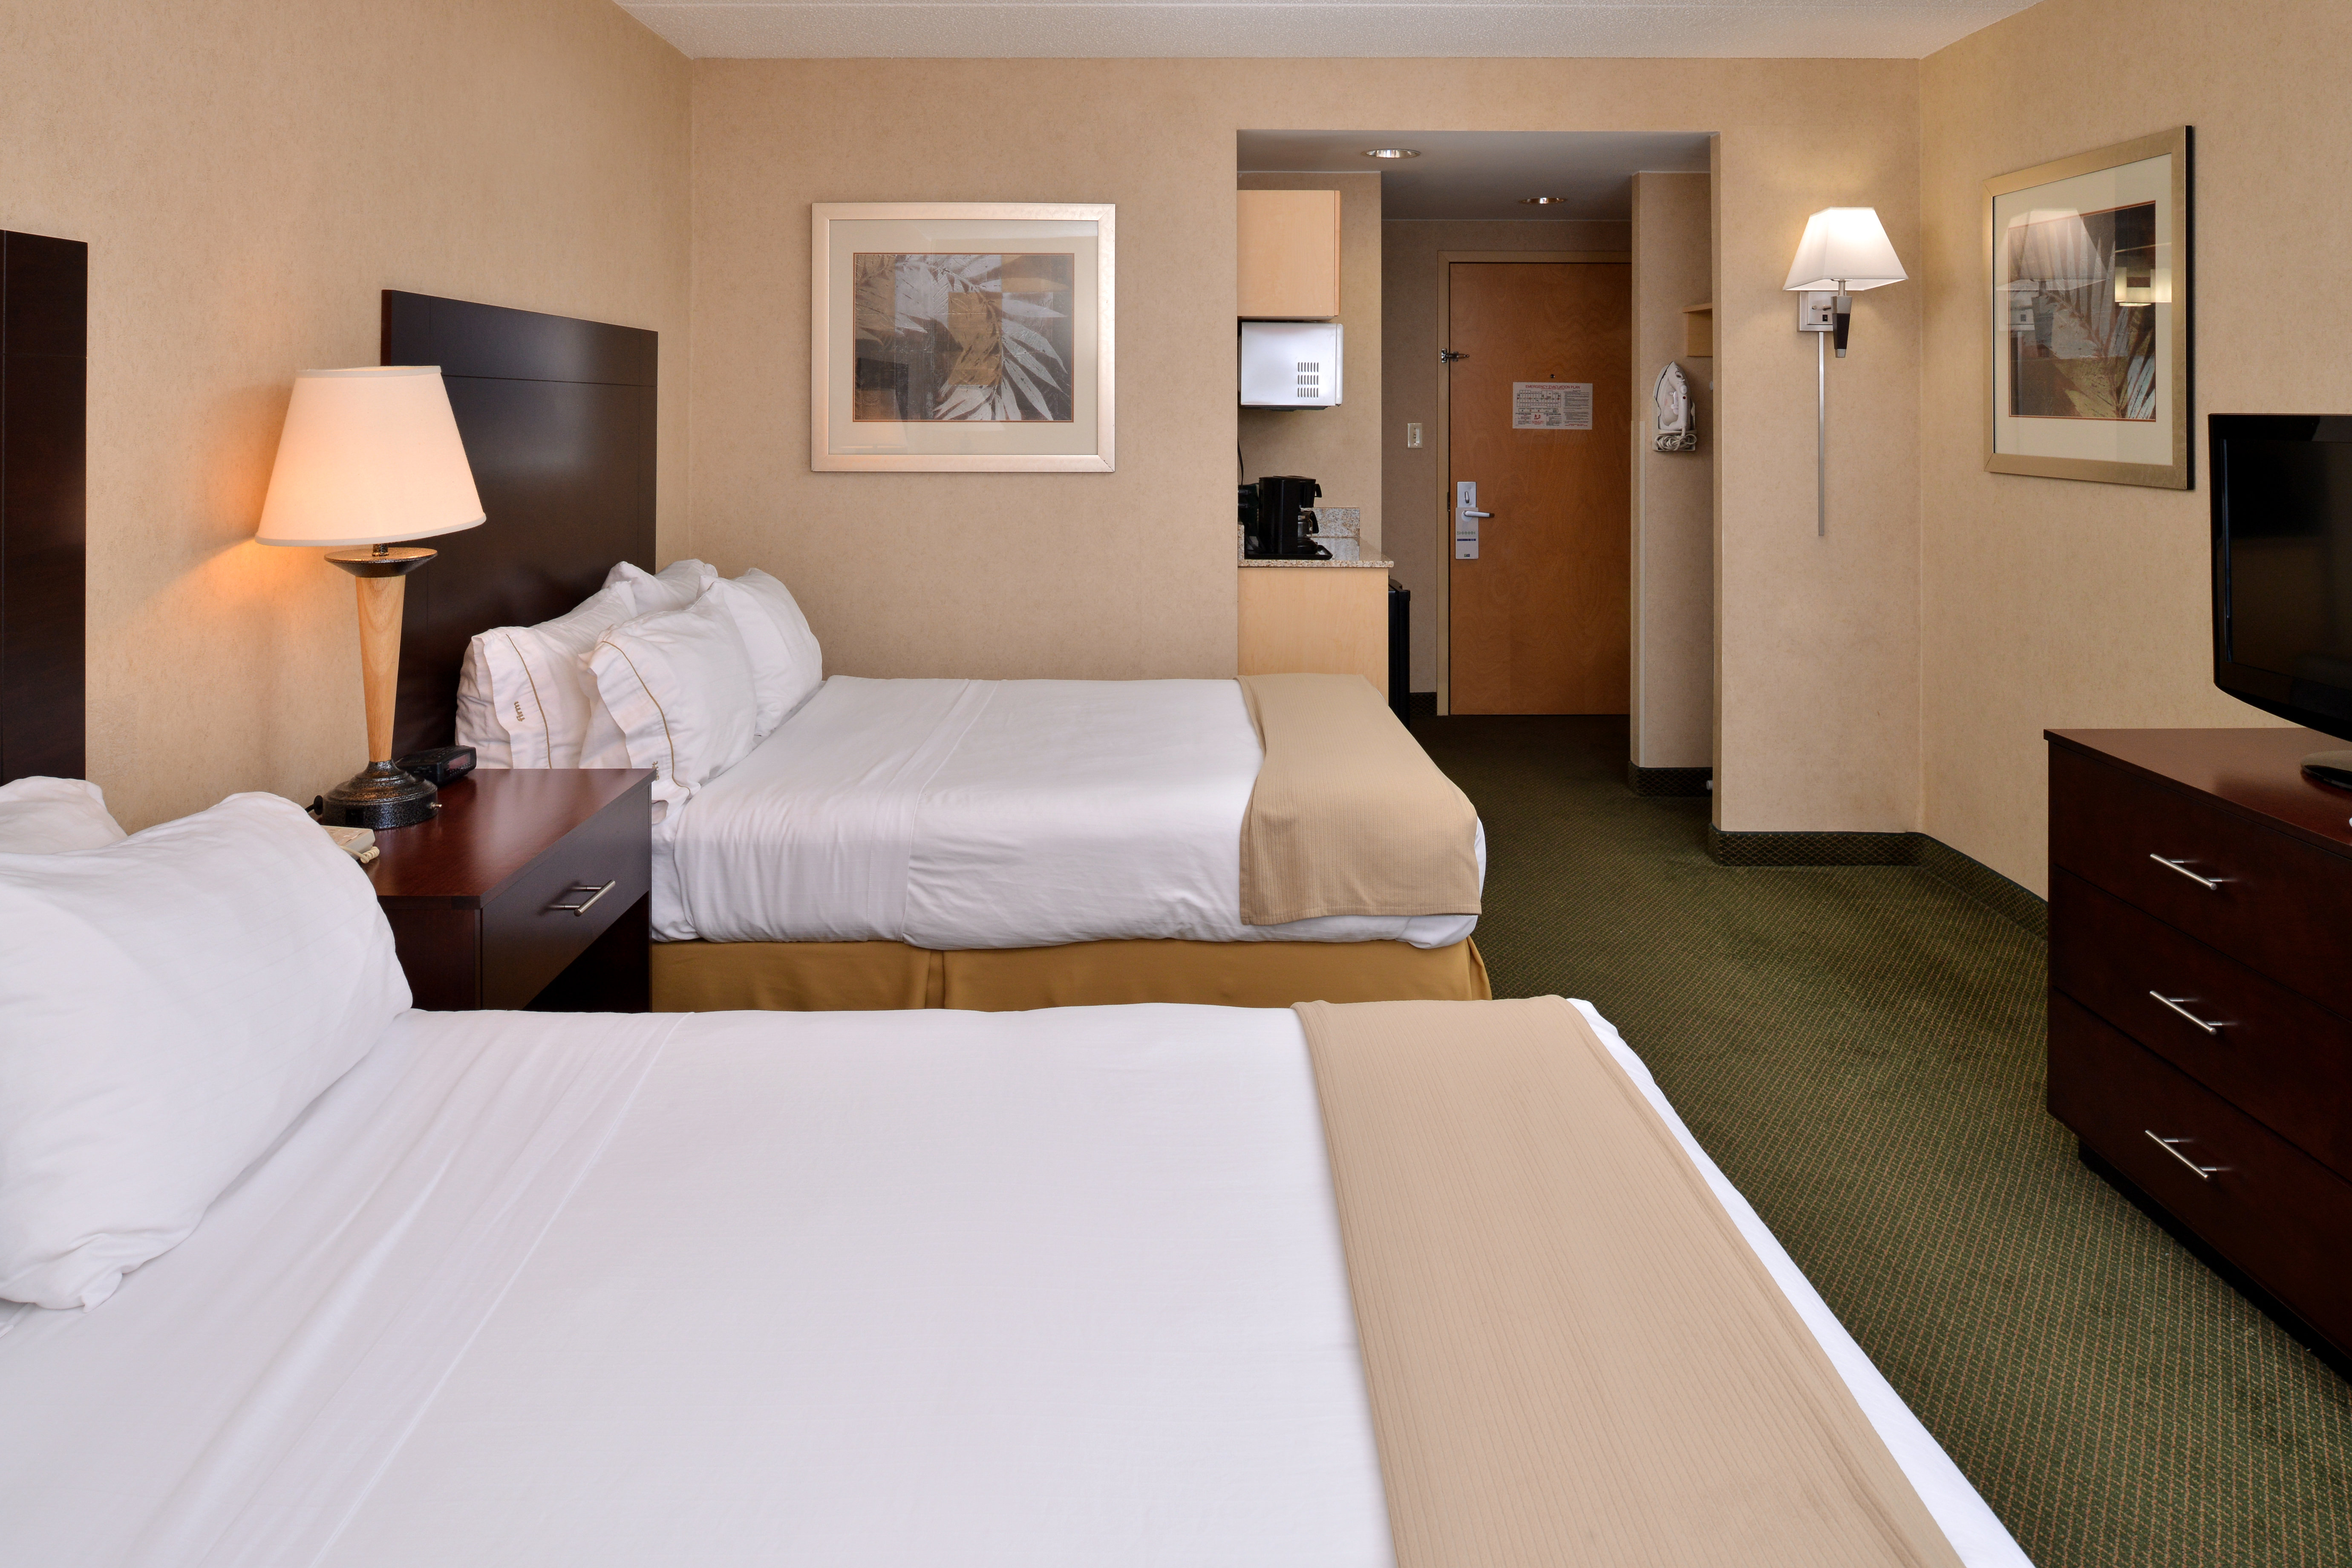 You won't want to get out of bed in our newly appointed guest room